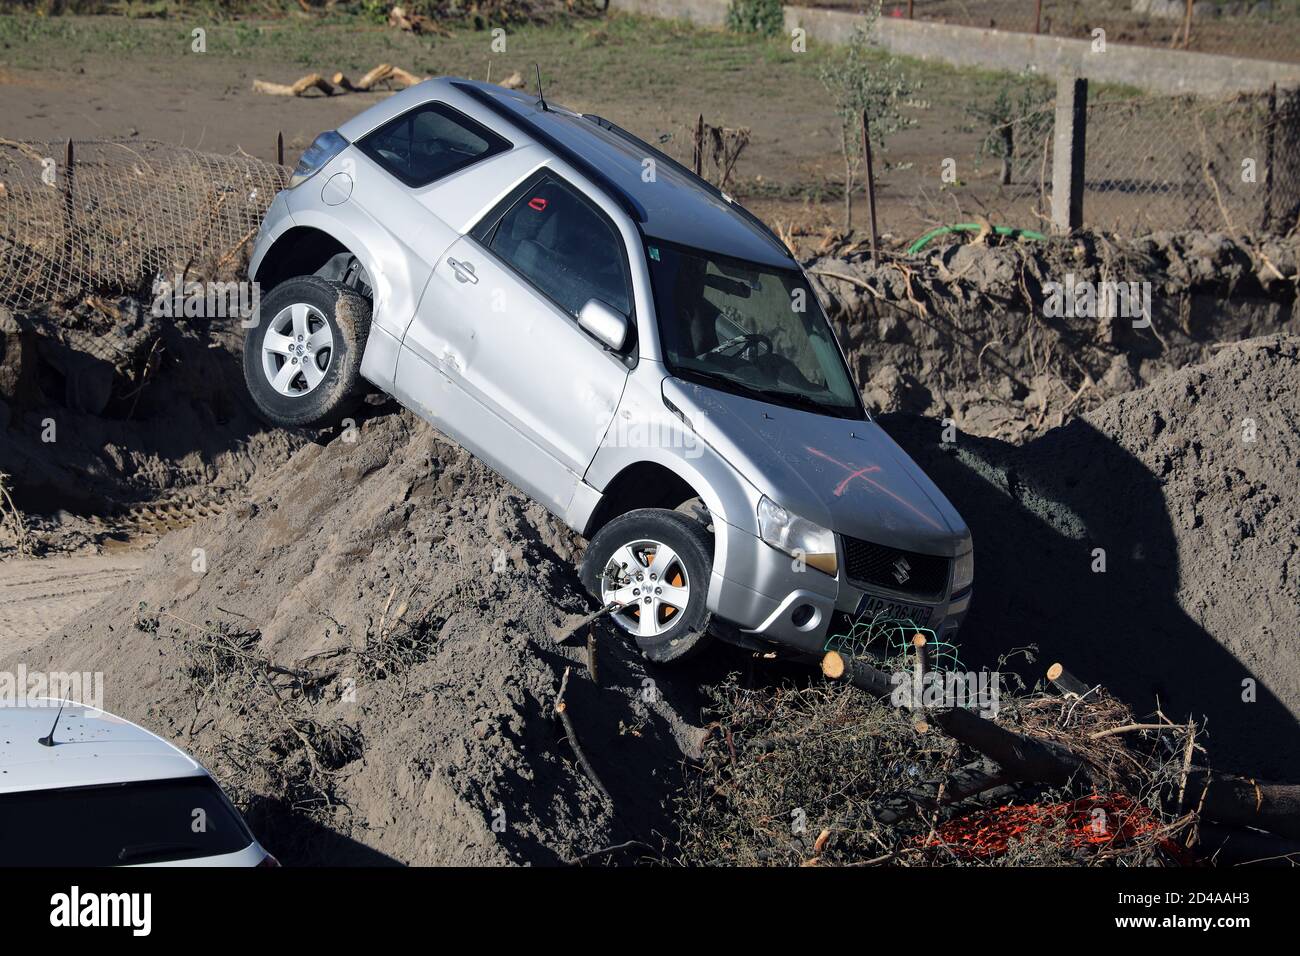 Breil-Sur-Roya, France - October 8, 2020: Town Of Breil-Sur-Roya Was Submerged By The Flooding Of The Roya River, Suzuki Grand Vitara SUV Car Complete Stock Photo